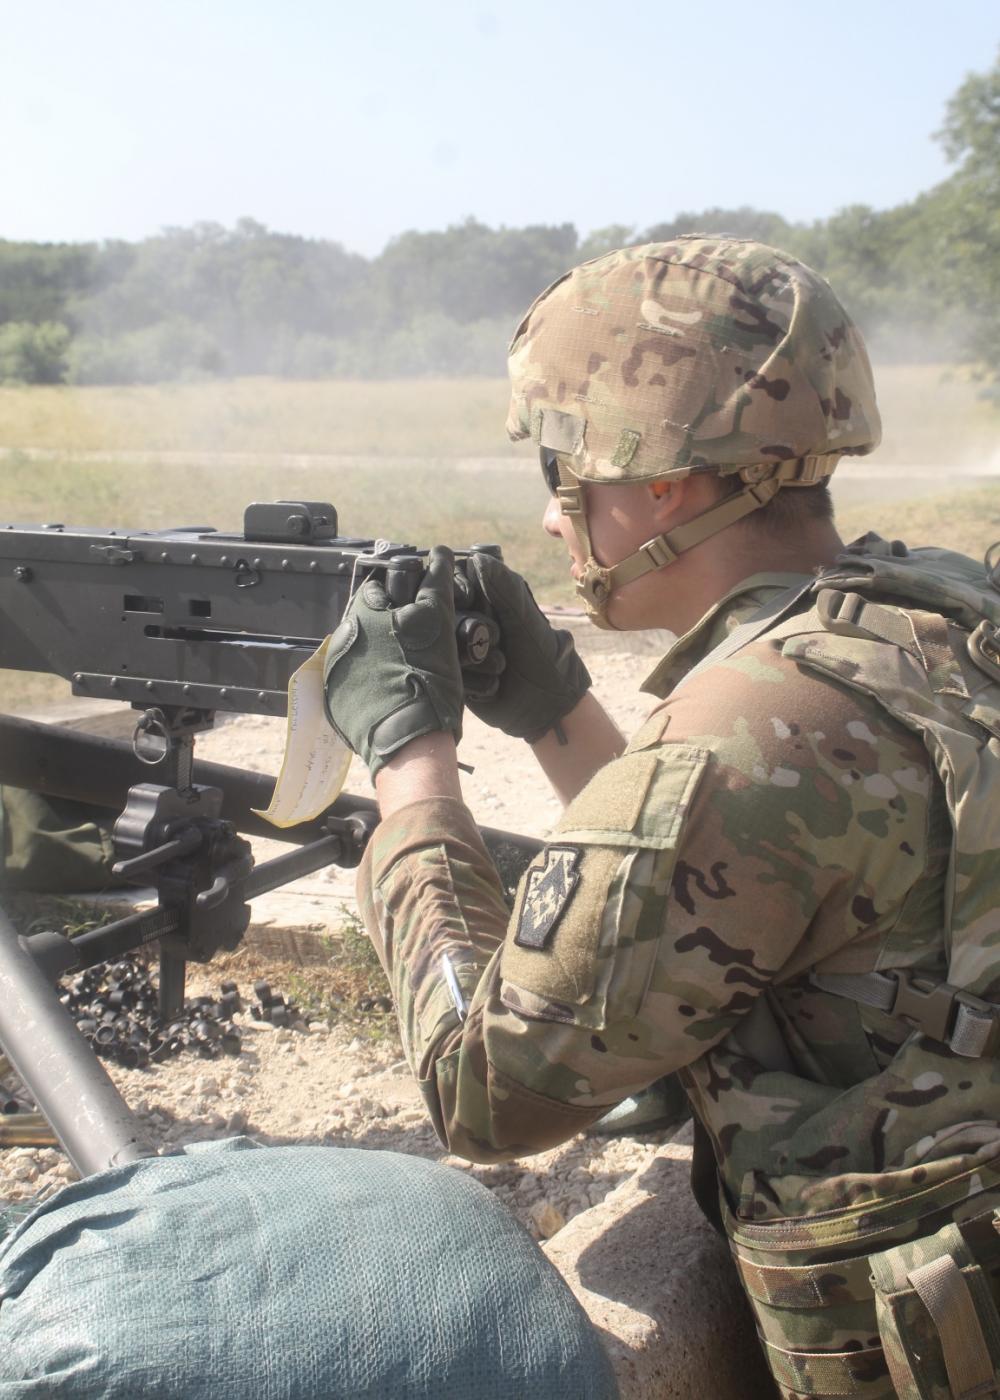 252nd QM weapons training